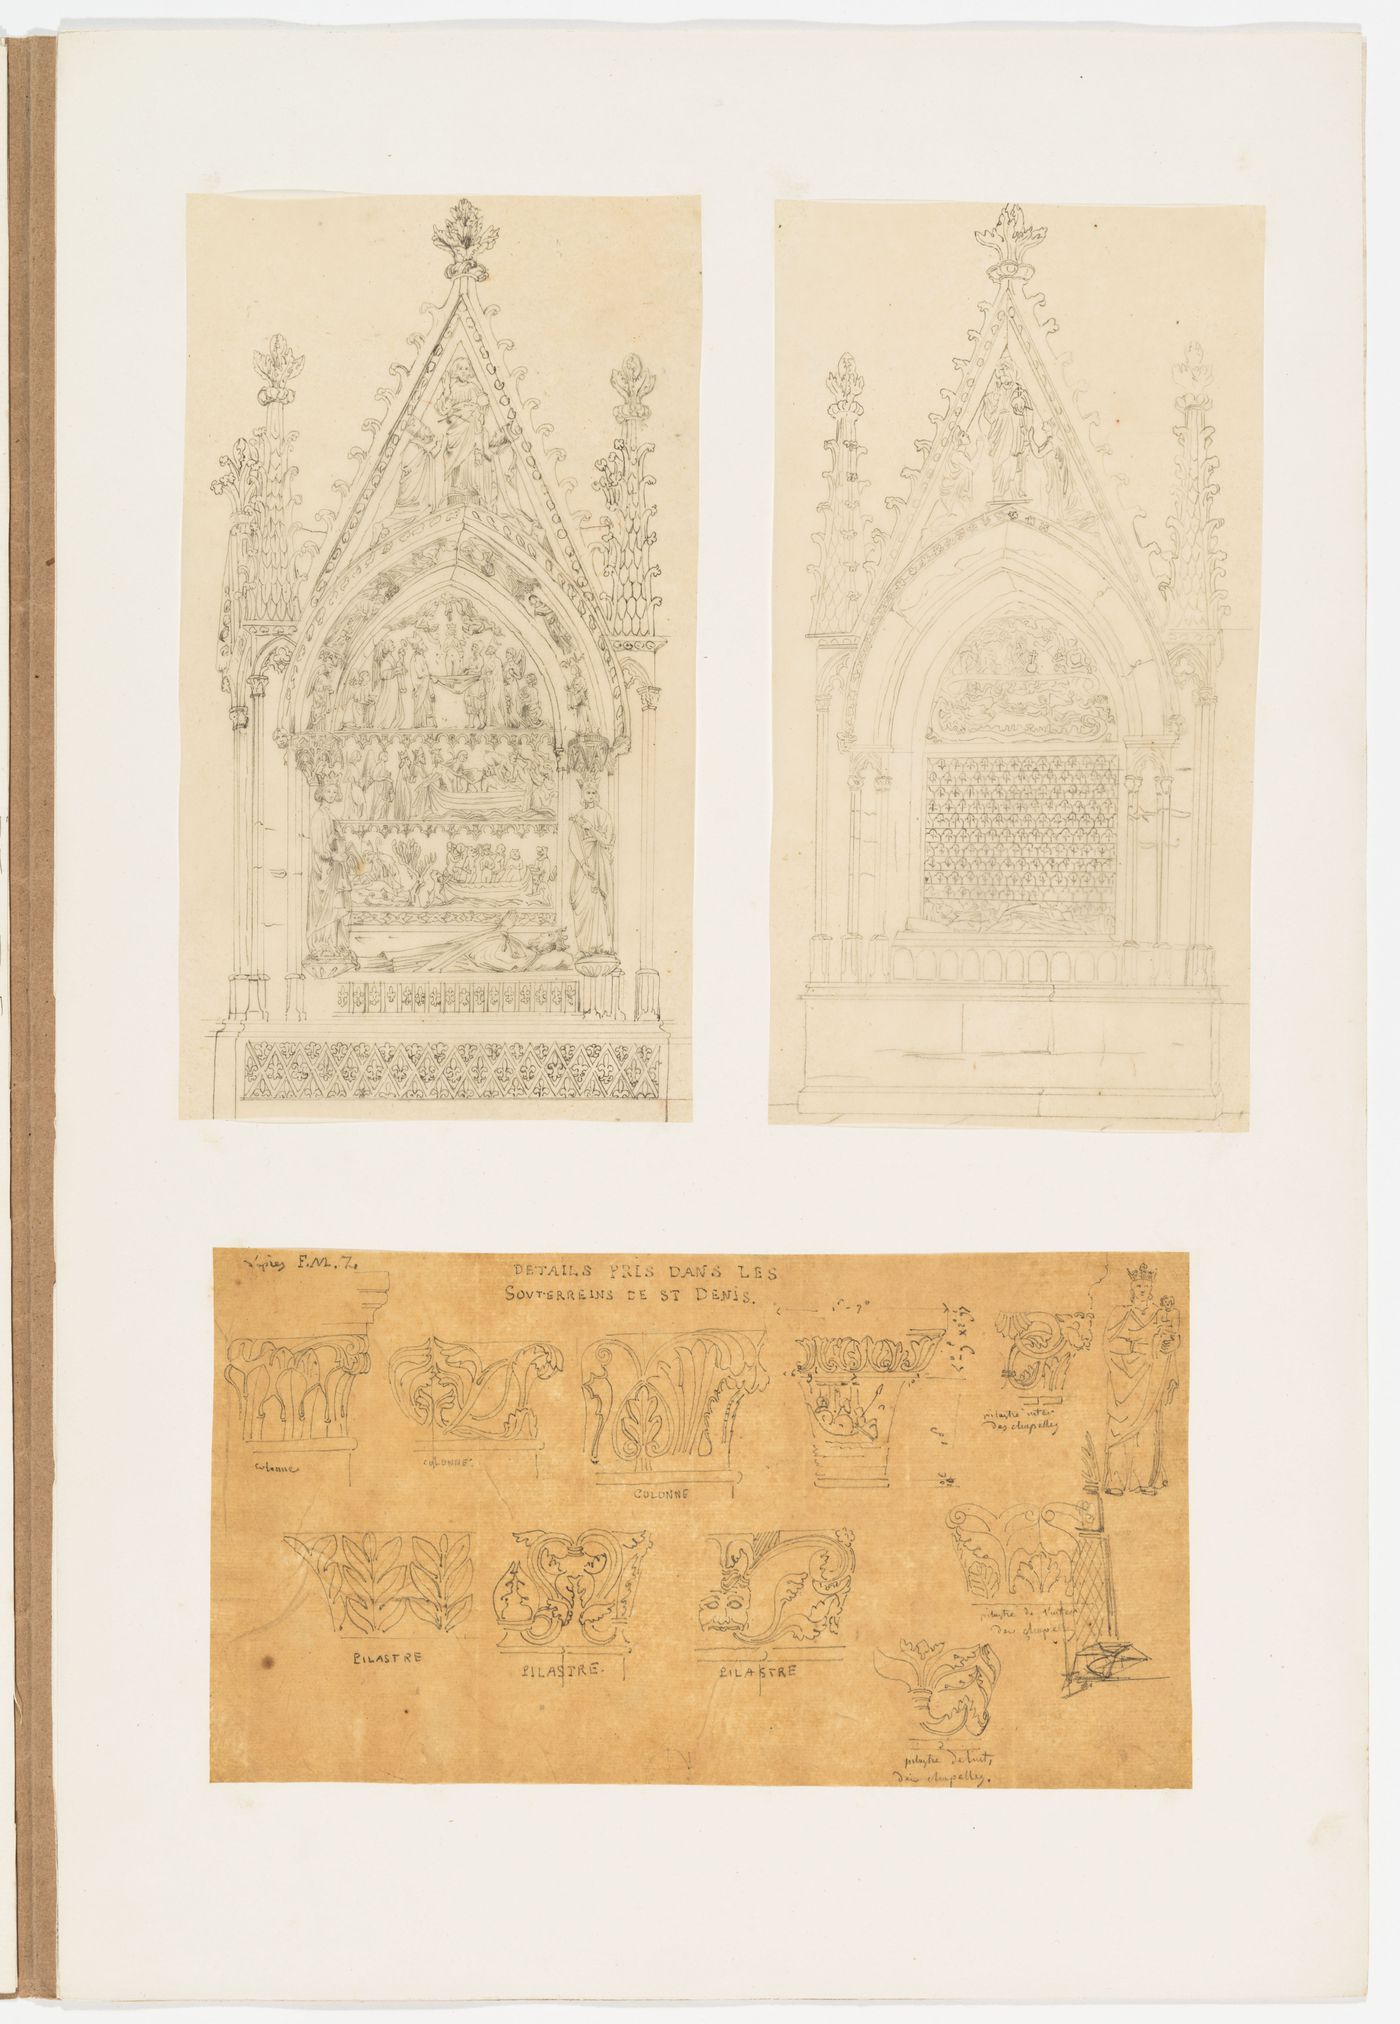 Two drawings of ornate carved Gothic tombs with gabled canopies; Details from the les "souterrains" of Saint-Denis, mainly capitals